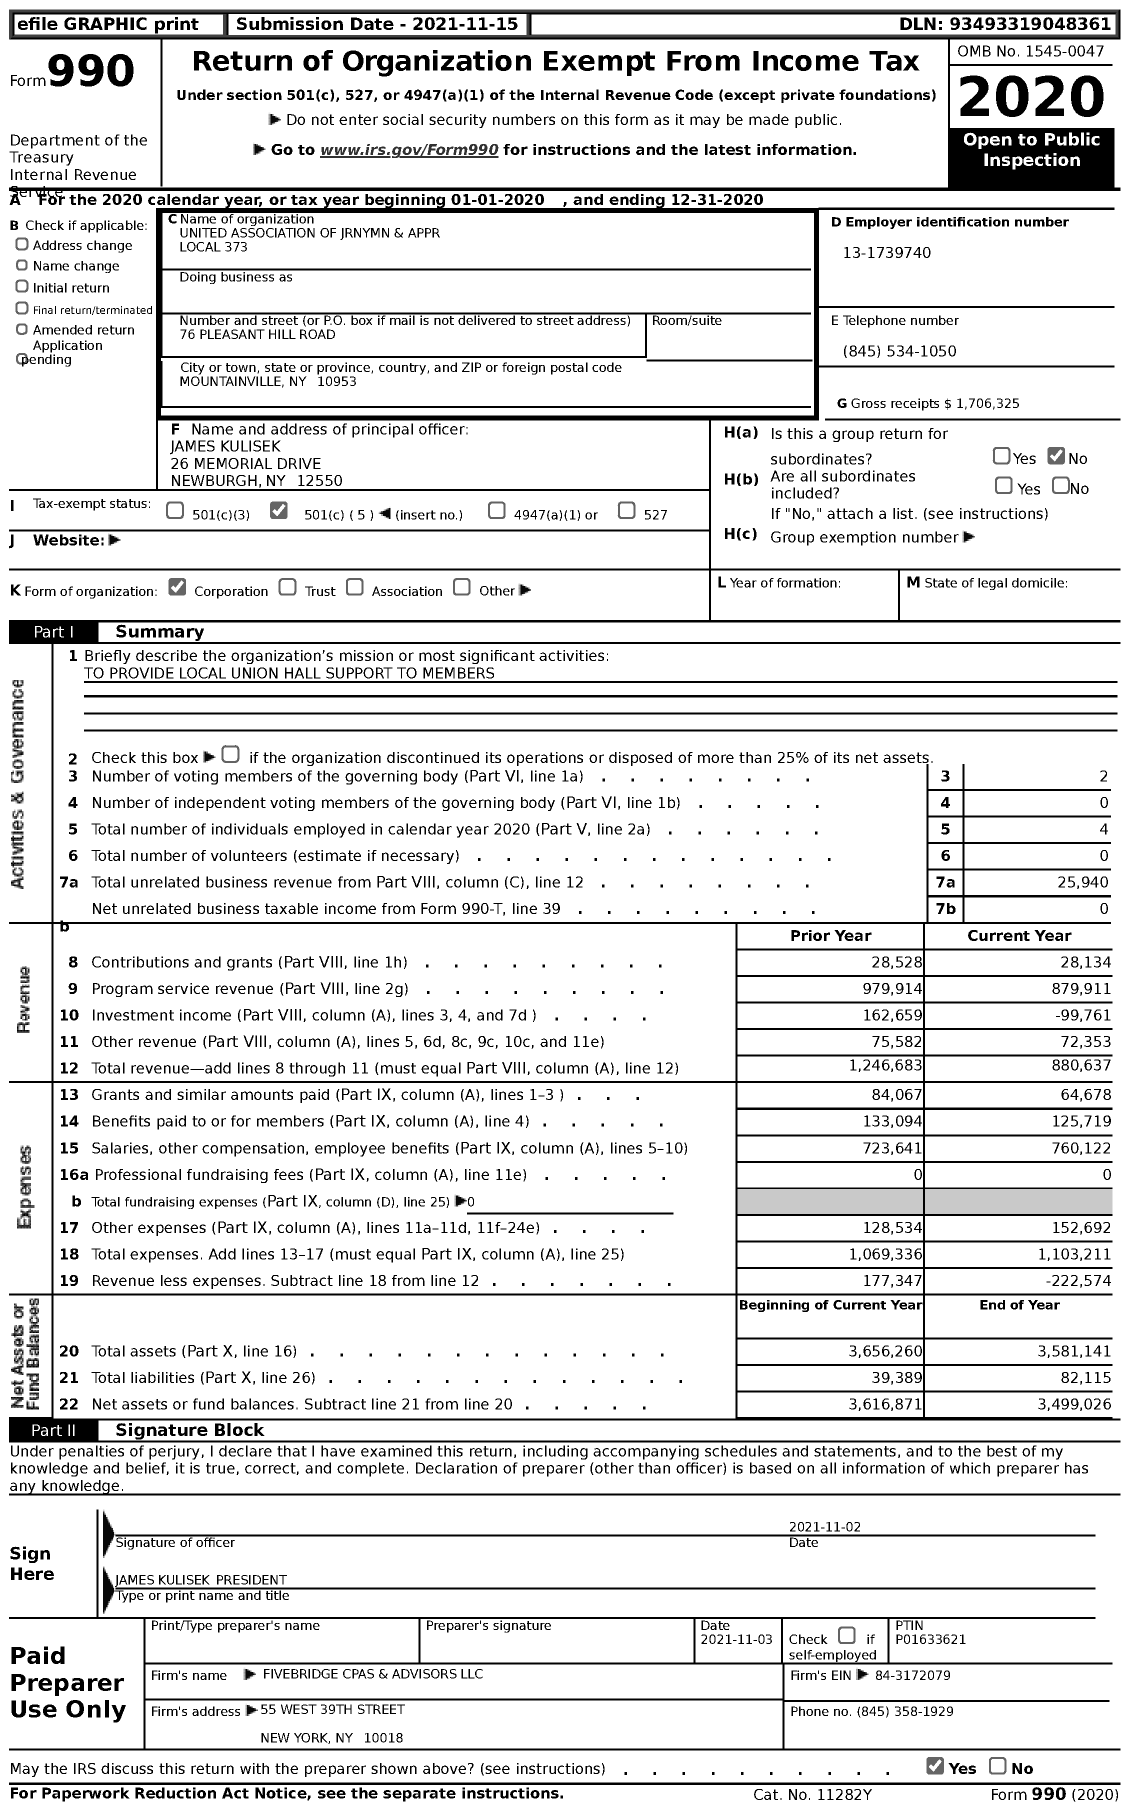 Image of first page of 2020 Form 990 for United Association - 373 Local